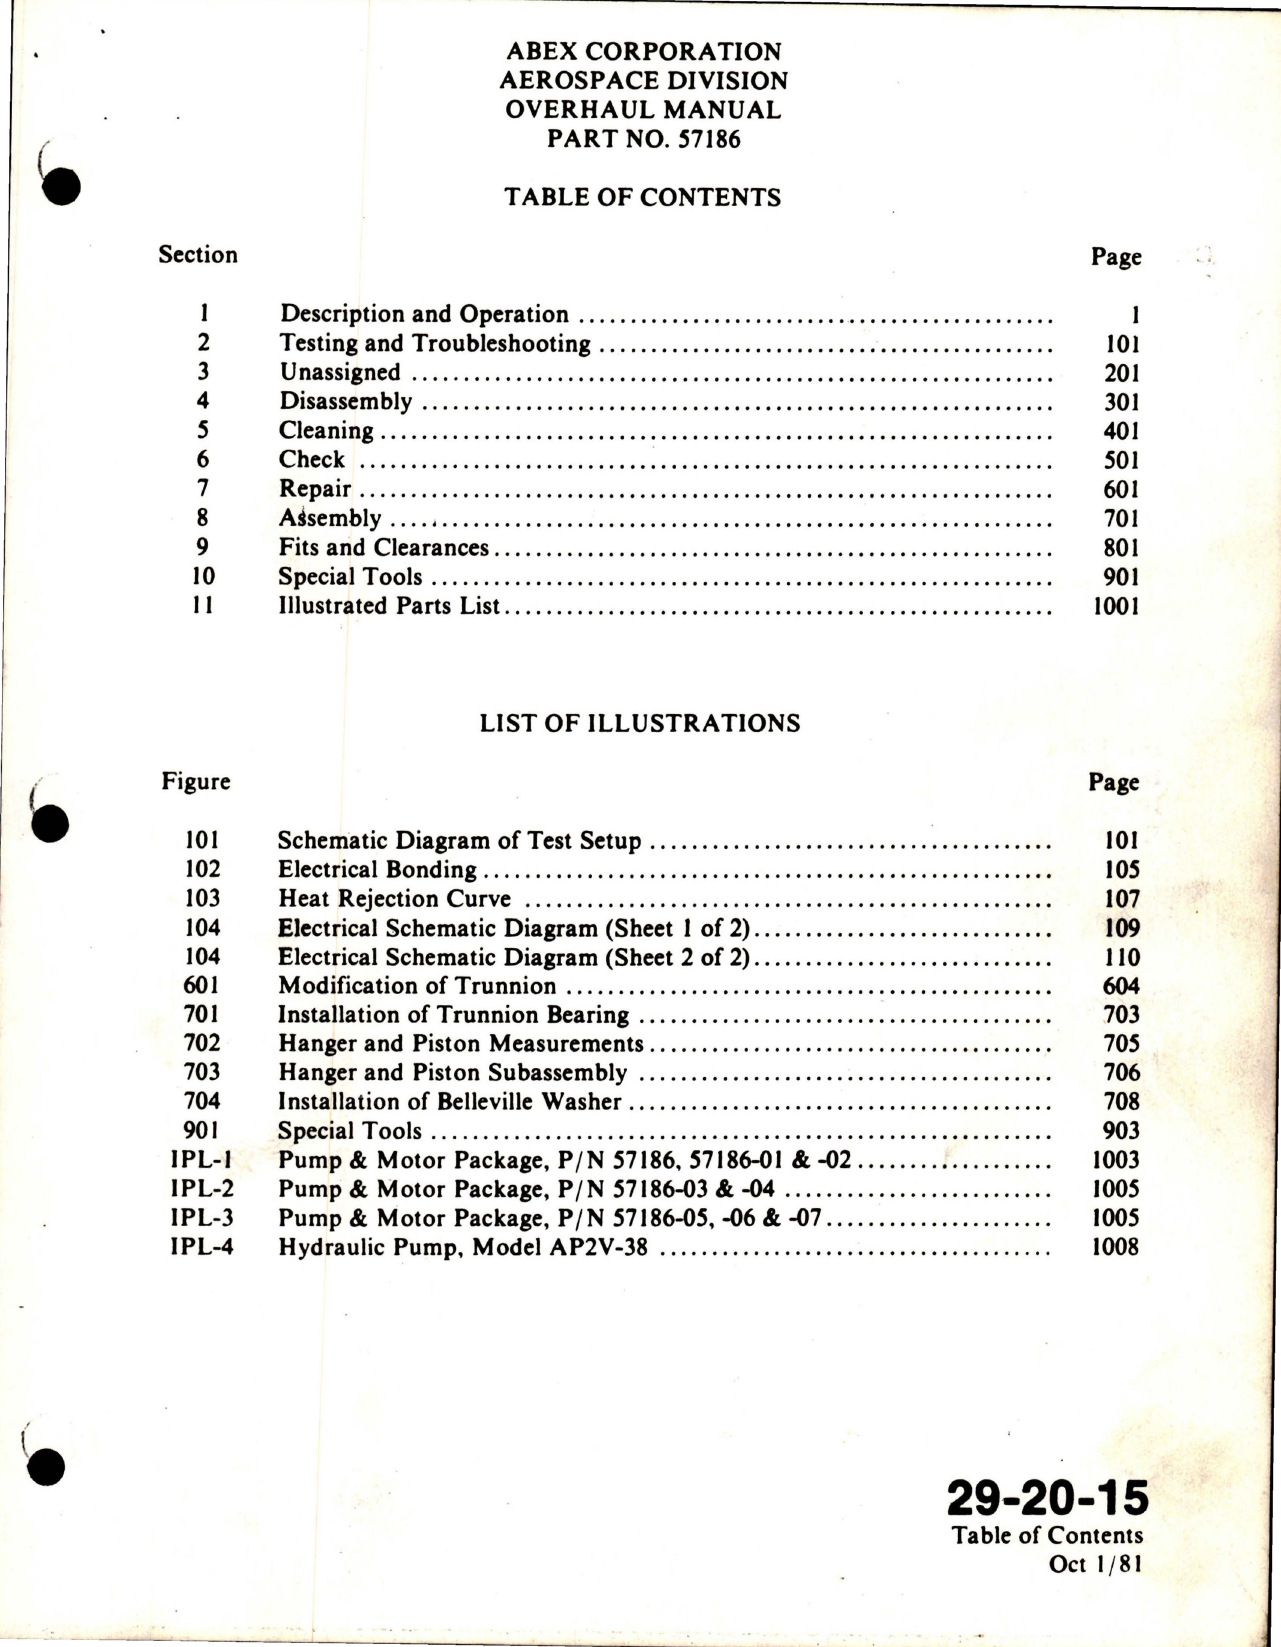 Sample page 9 from AirCorps Library document: Maintenance Instructions with Illustrated Parts List for Pump and Motor Package 